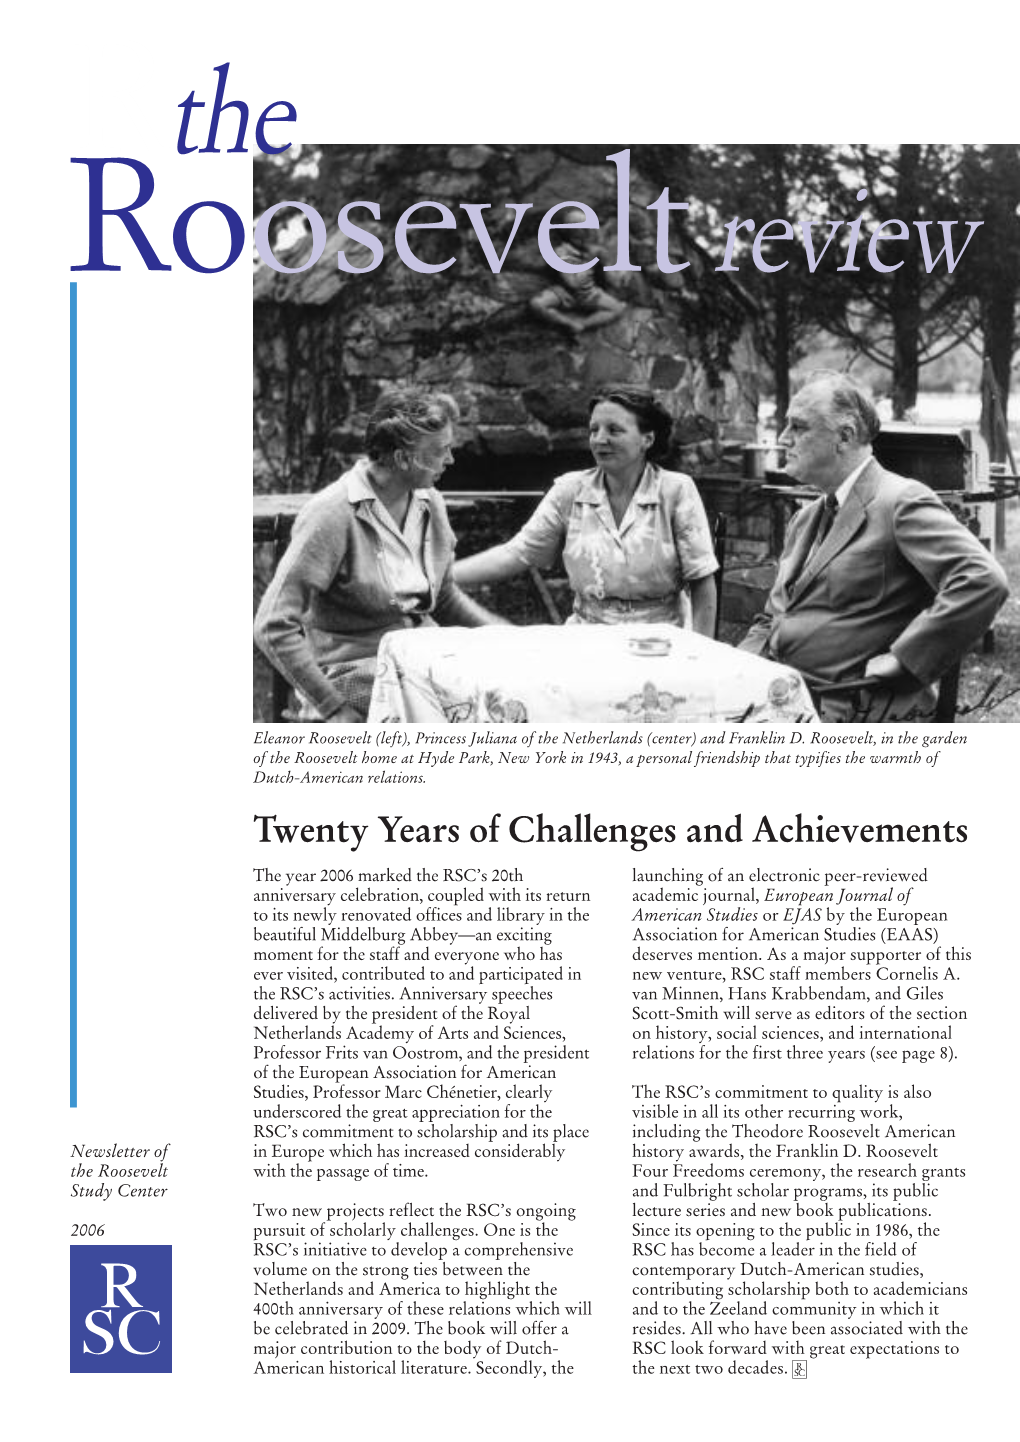 The Roosevelt Review 2006